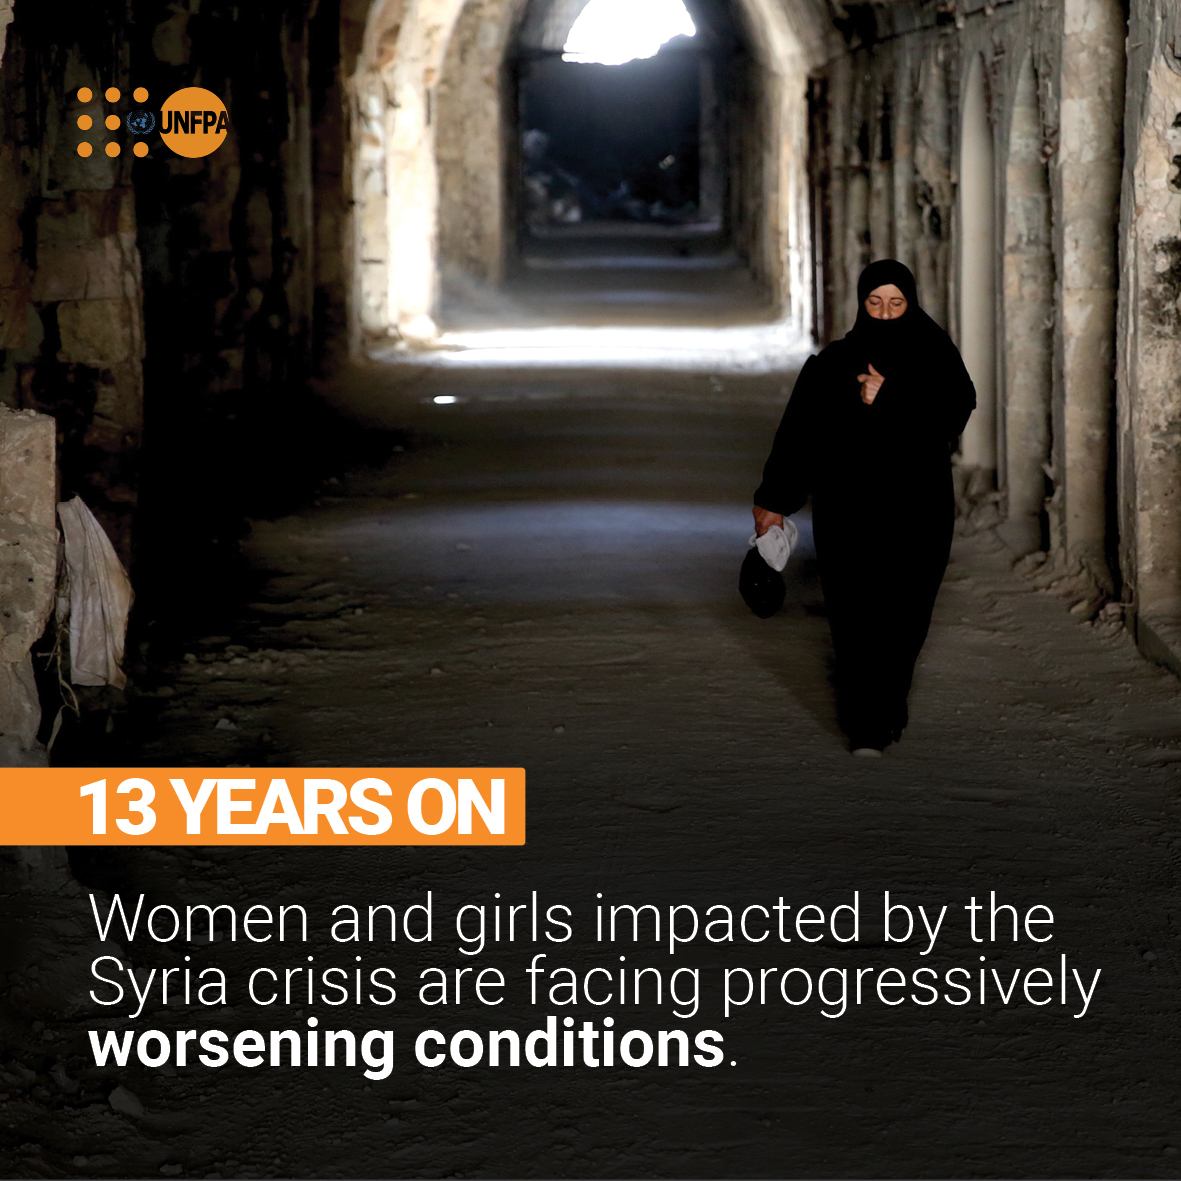 Syria: 13 years of conflict has left 8 million women & girls in dire need. @UNFPA has been on the ground throughout the crisis to ensure vulnerable women & girls can access sexual & reproductive health care —but says more support is needed. unf.pa/syria